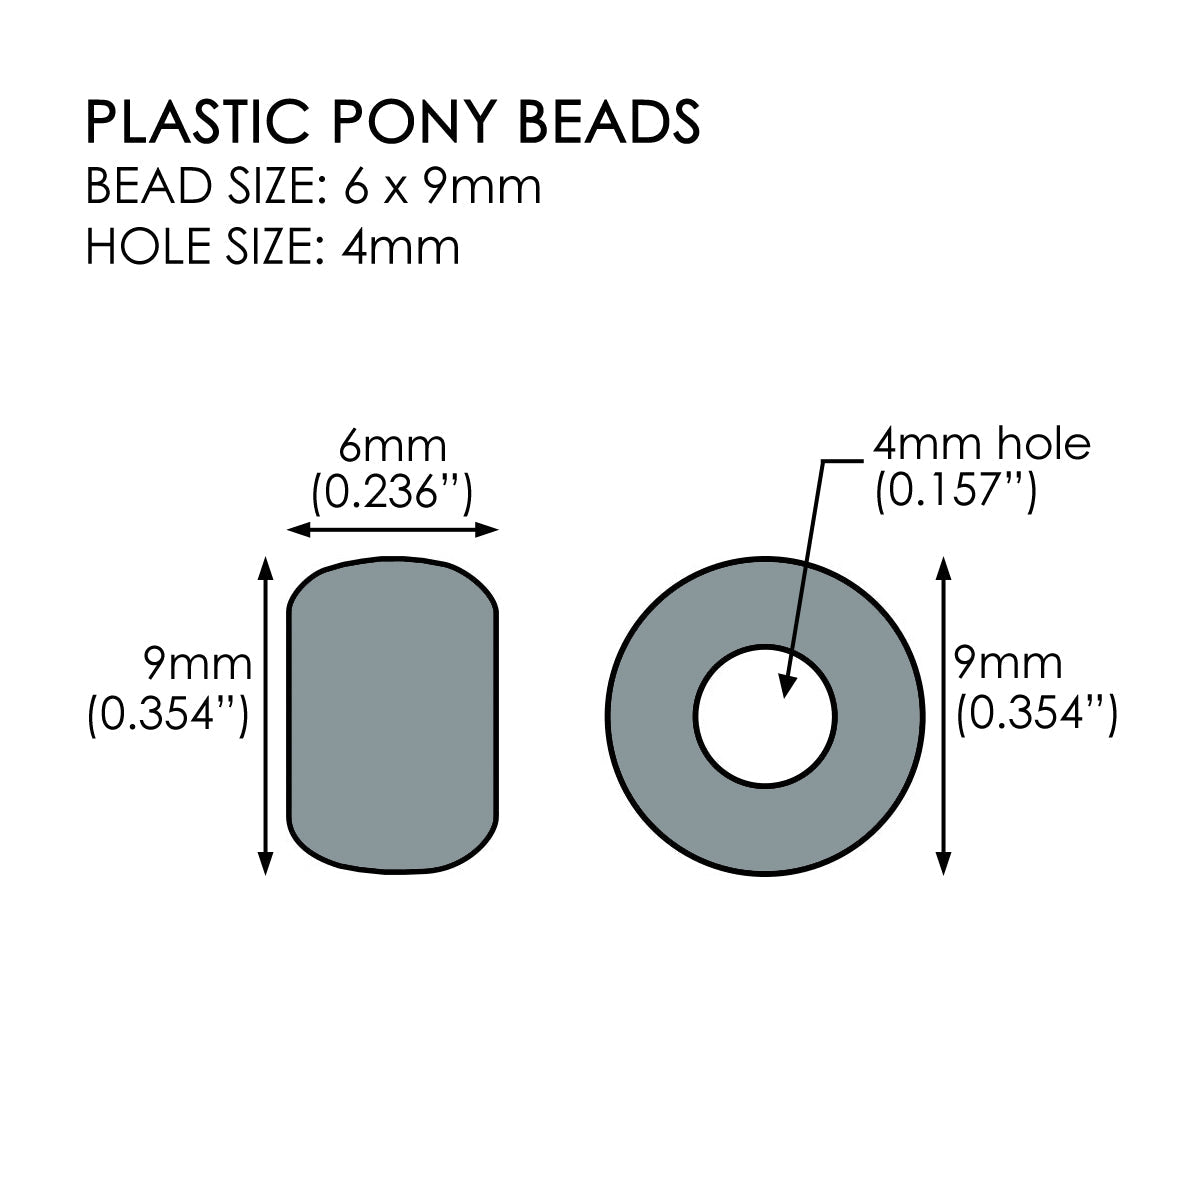 Gold Pearl Plastic Craft Pony Beads 6x9mm, Made in the USA - Pony Bead Store